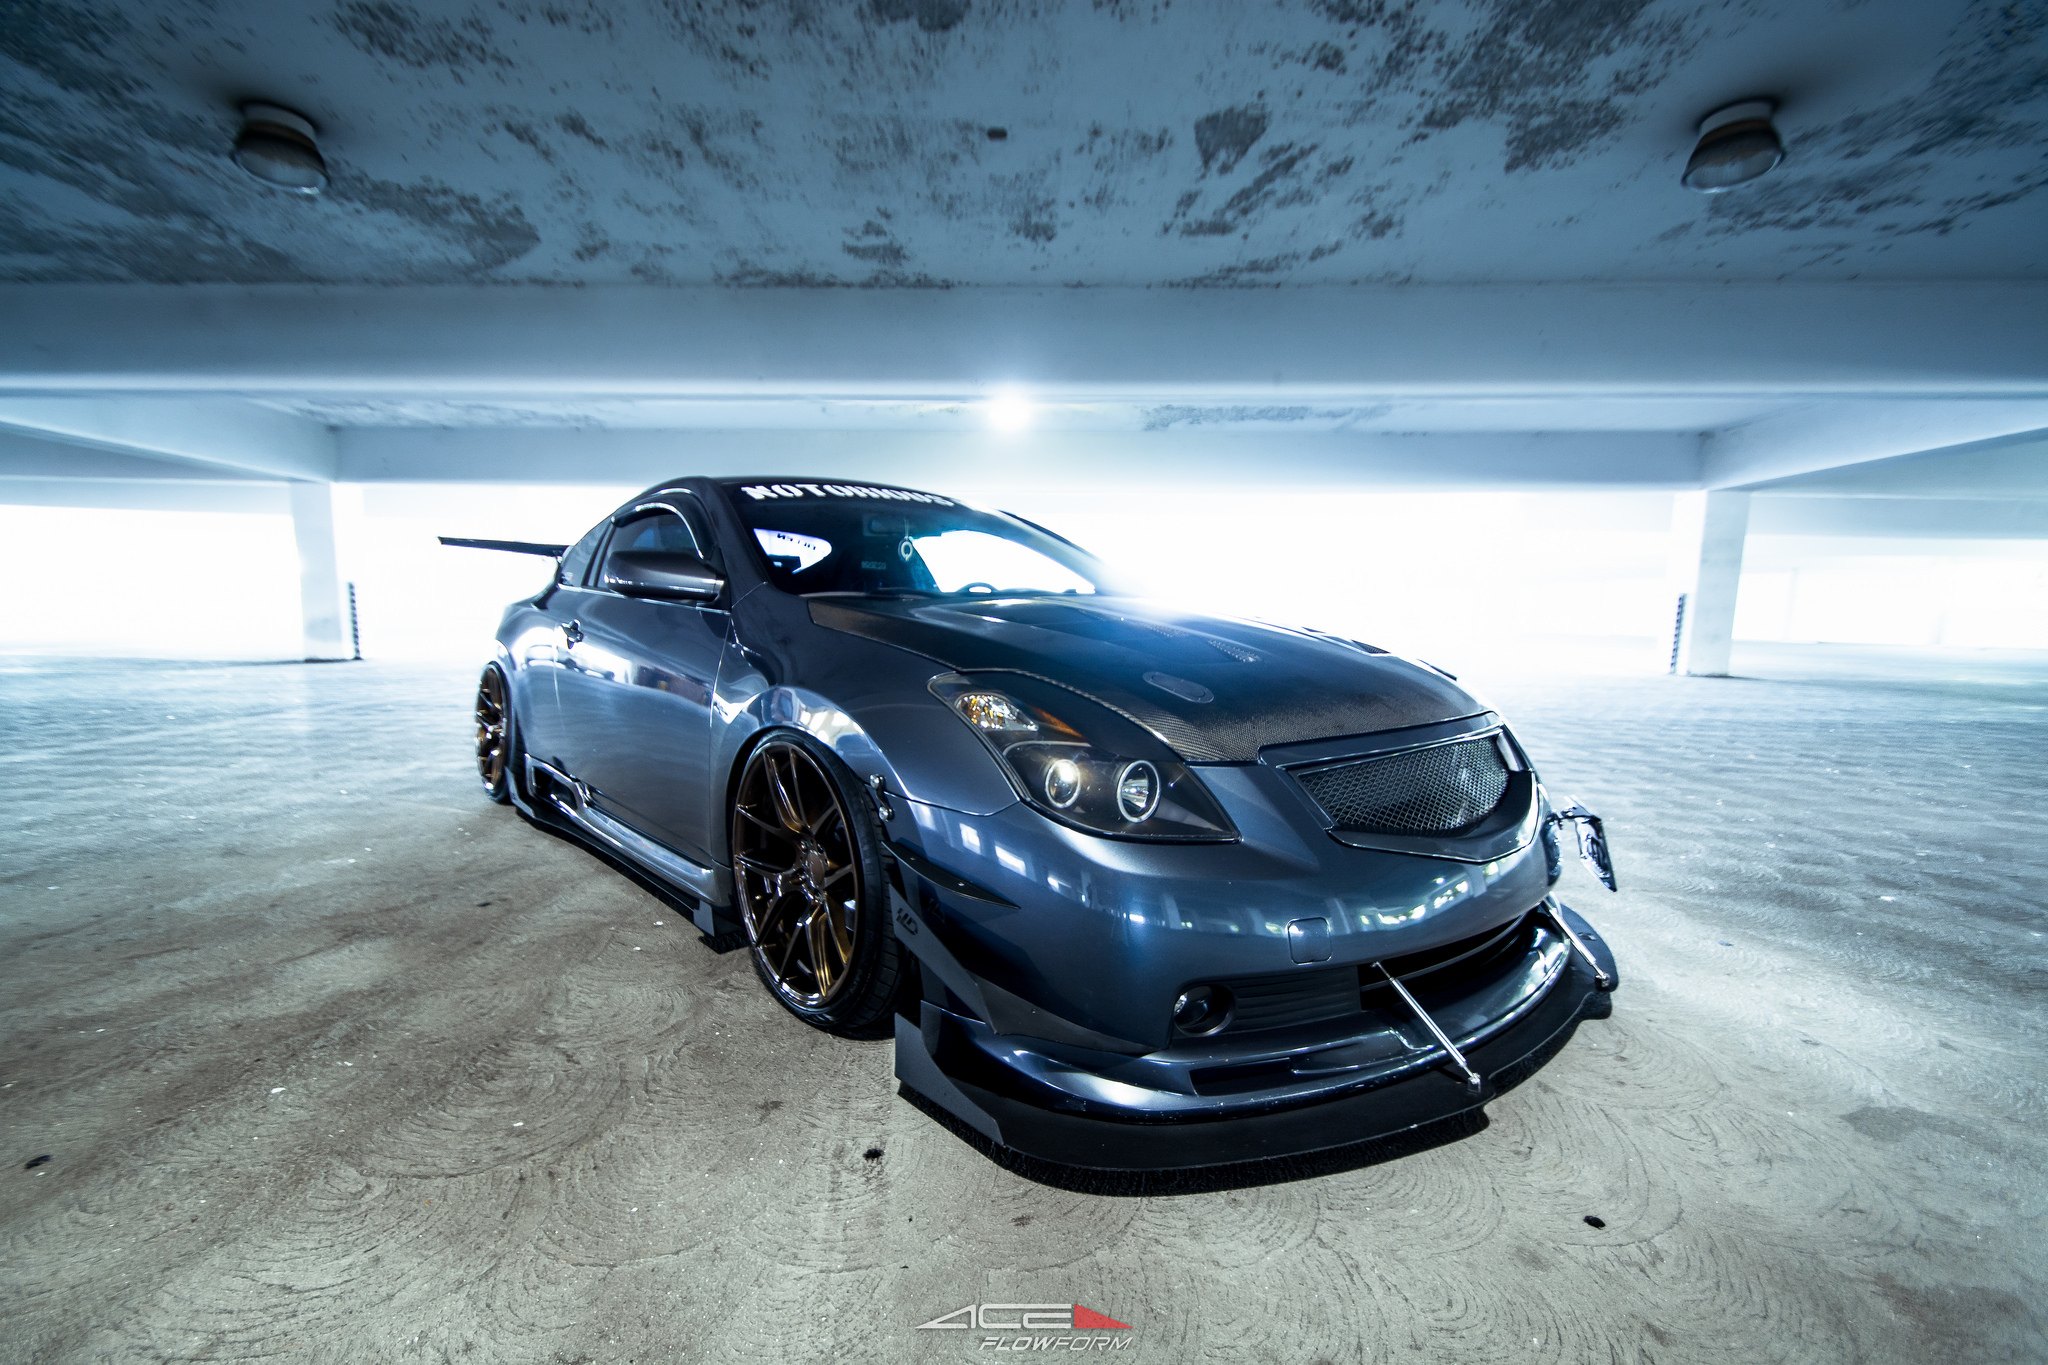 Modified Nissan Altima with Air Suspension and Sport Body Kit - Photo by TSW